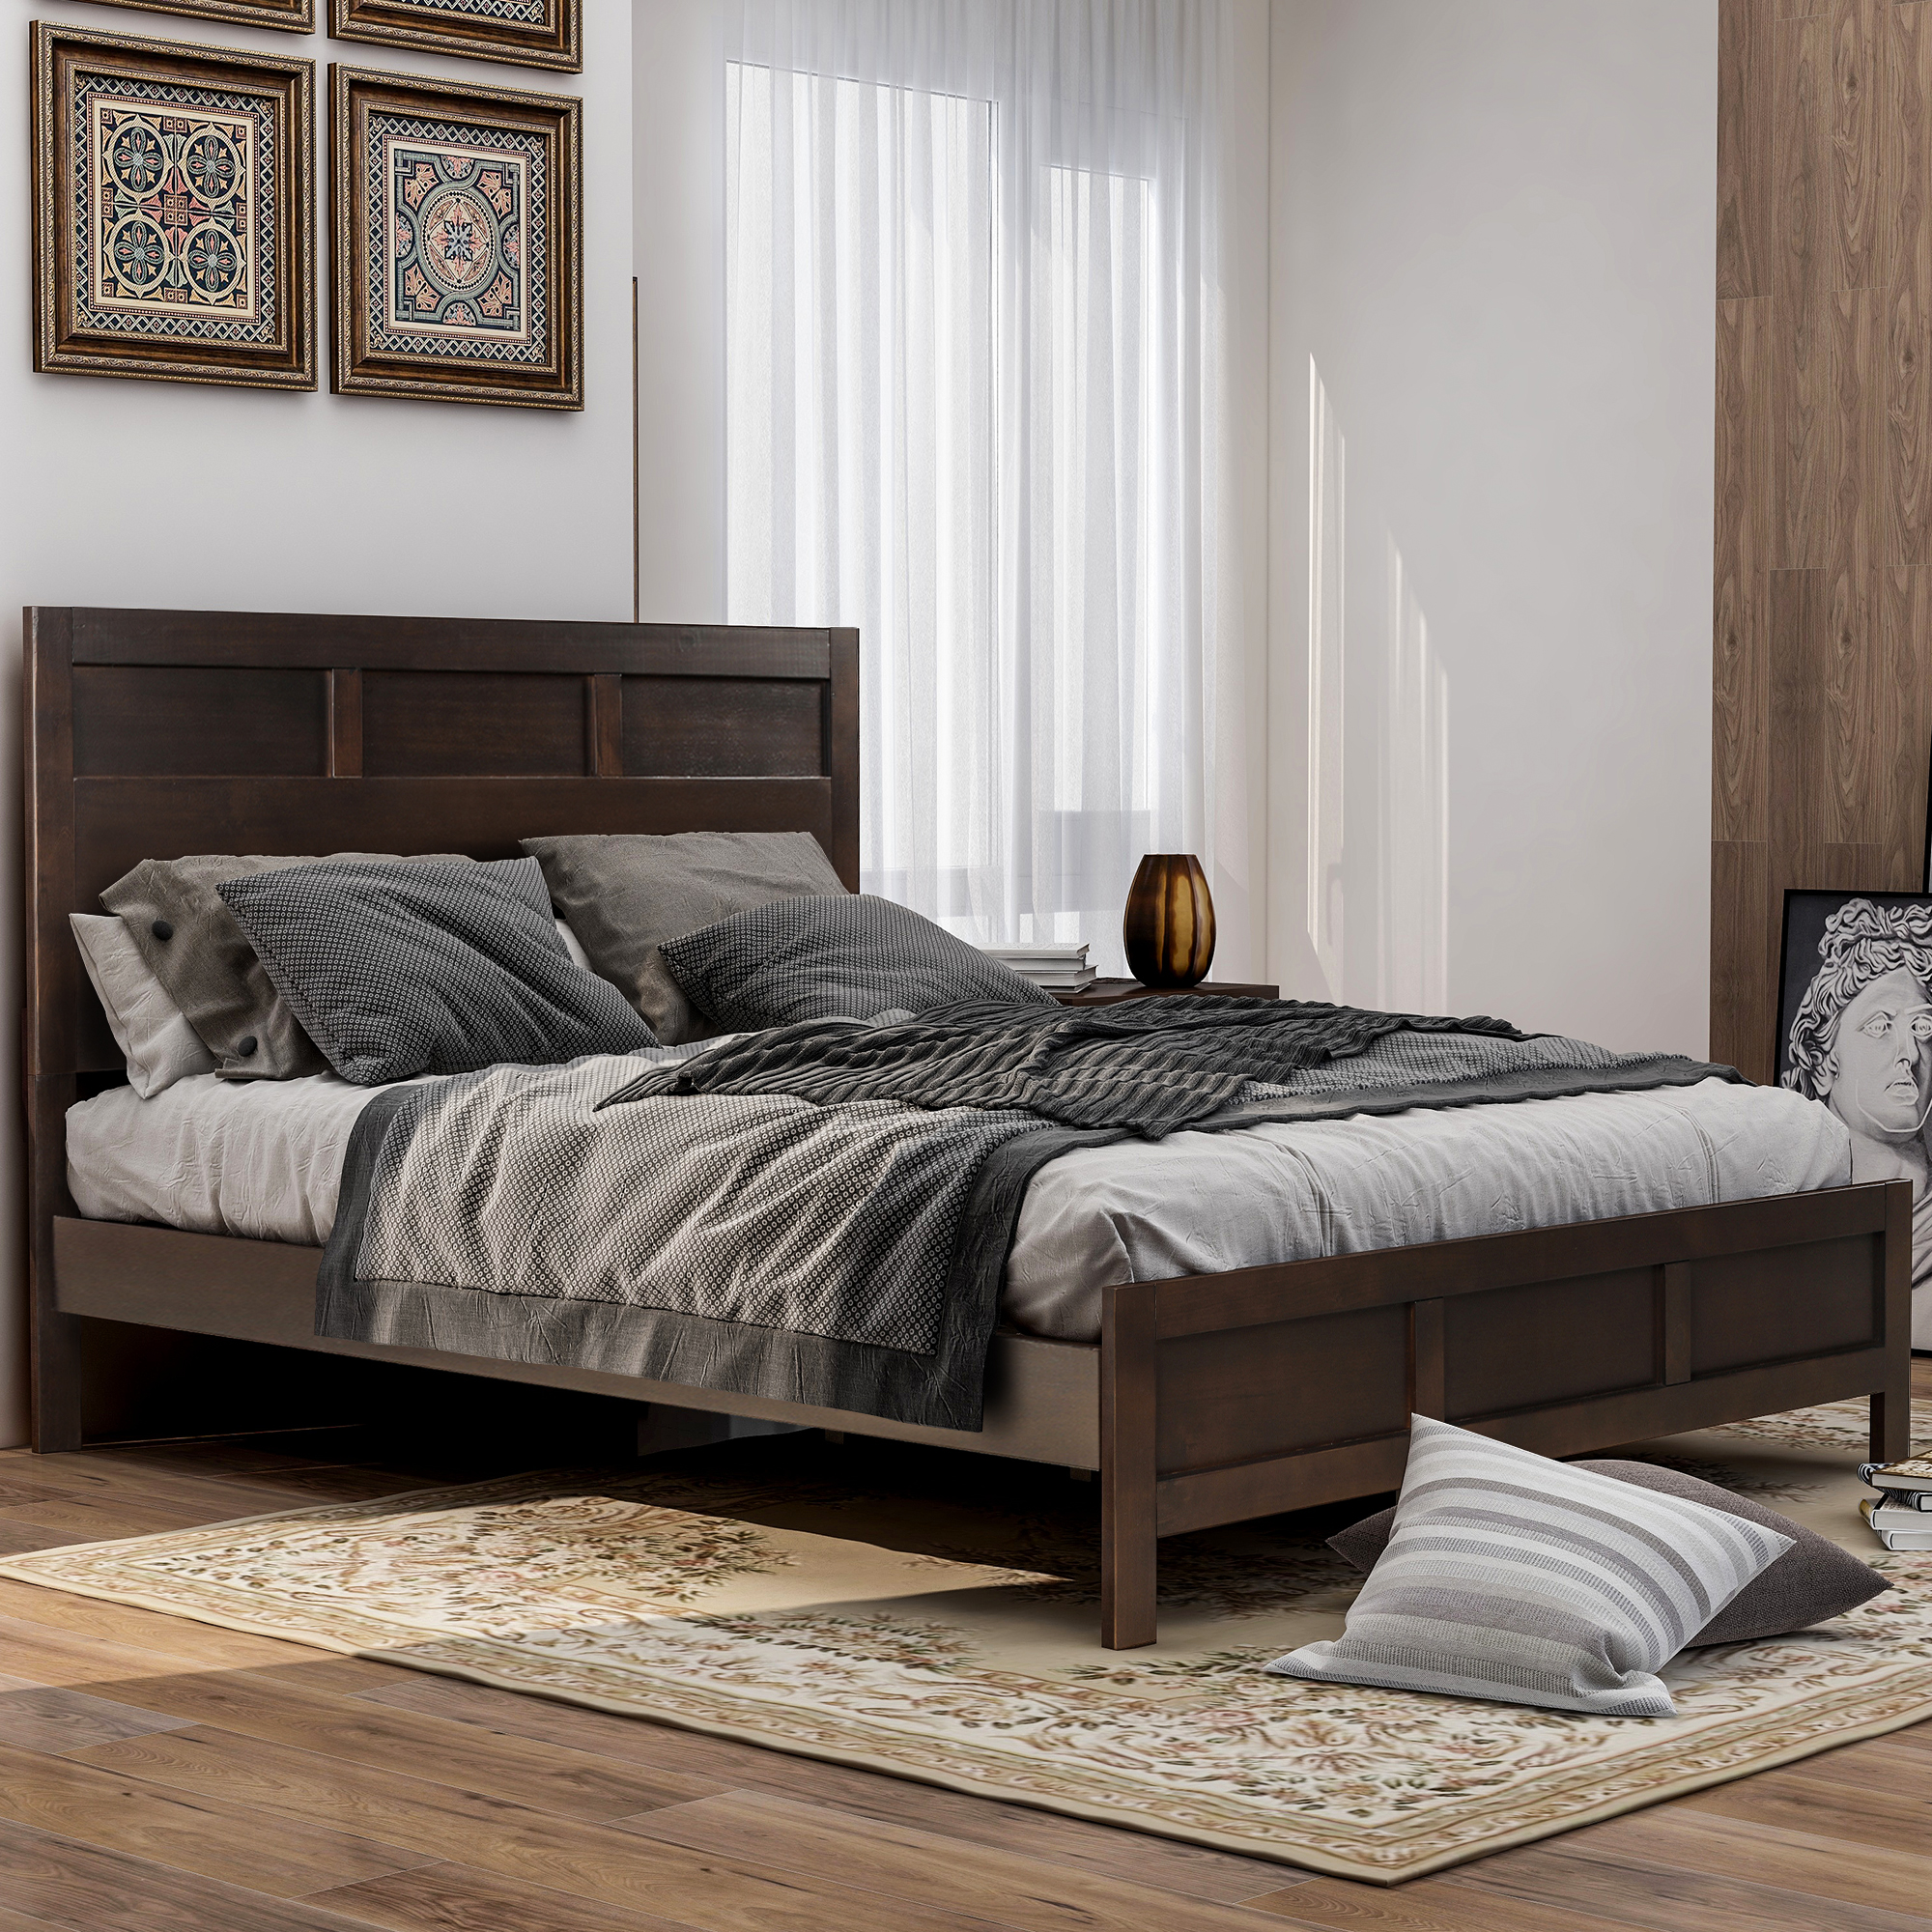 Classic King Platform Bed in Rich Brown No Box Spring Needed (Freely Configurable Bedroom Sets) For pickup buyer, this product can be shipped by Fedex!-Boyel Living